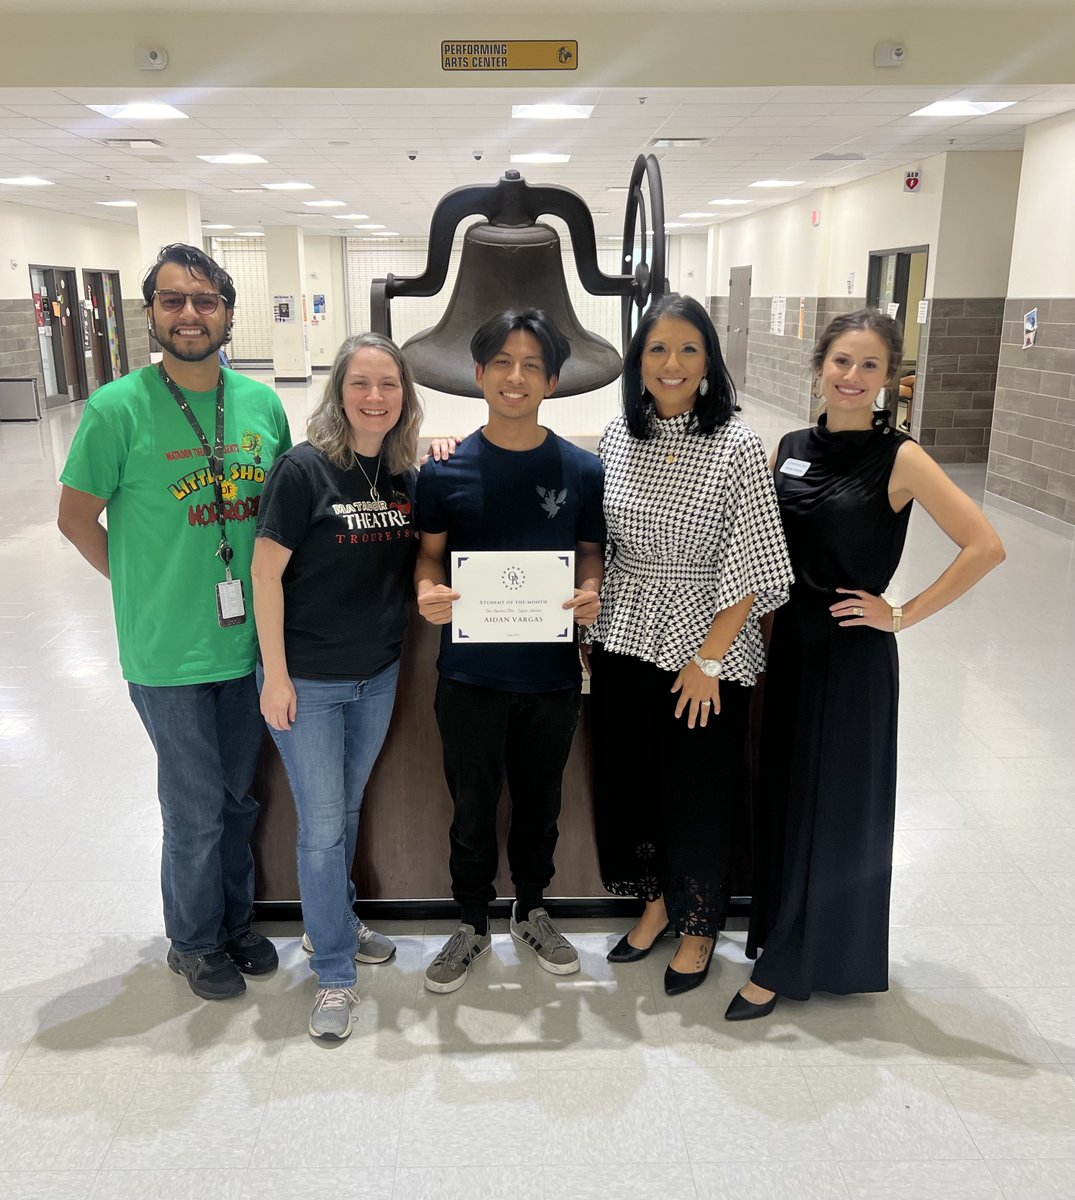 Aidan Vargas is @SeguinHSTx's shining star and the @OldRepTitle Student of the Month! 🎭 This senior leads the Thespian Society, excels academically, and is an All-Star cast actor and National Thespian qualifier. Congratulations Aiden! #1Heart1Seguin